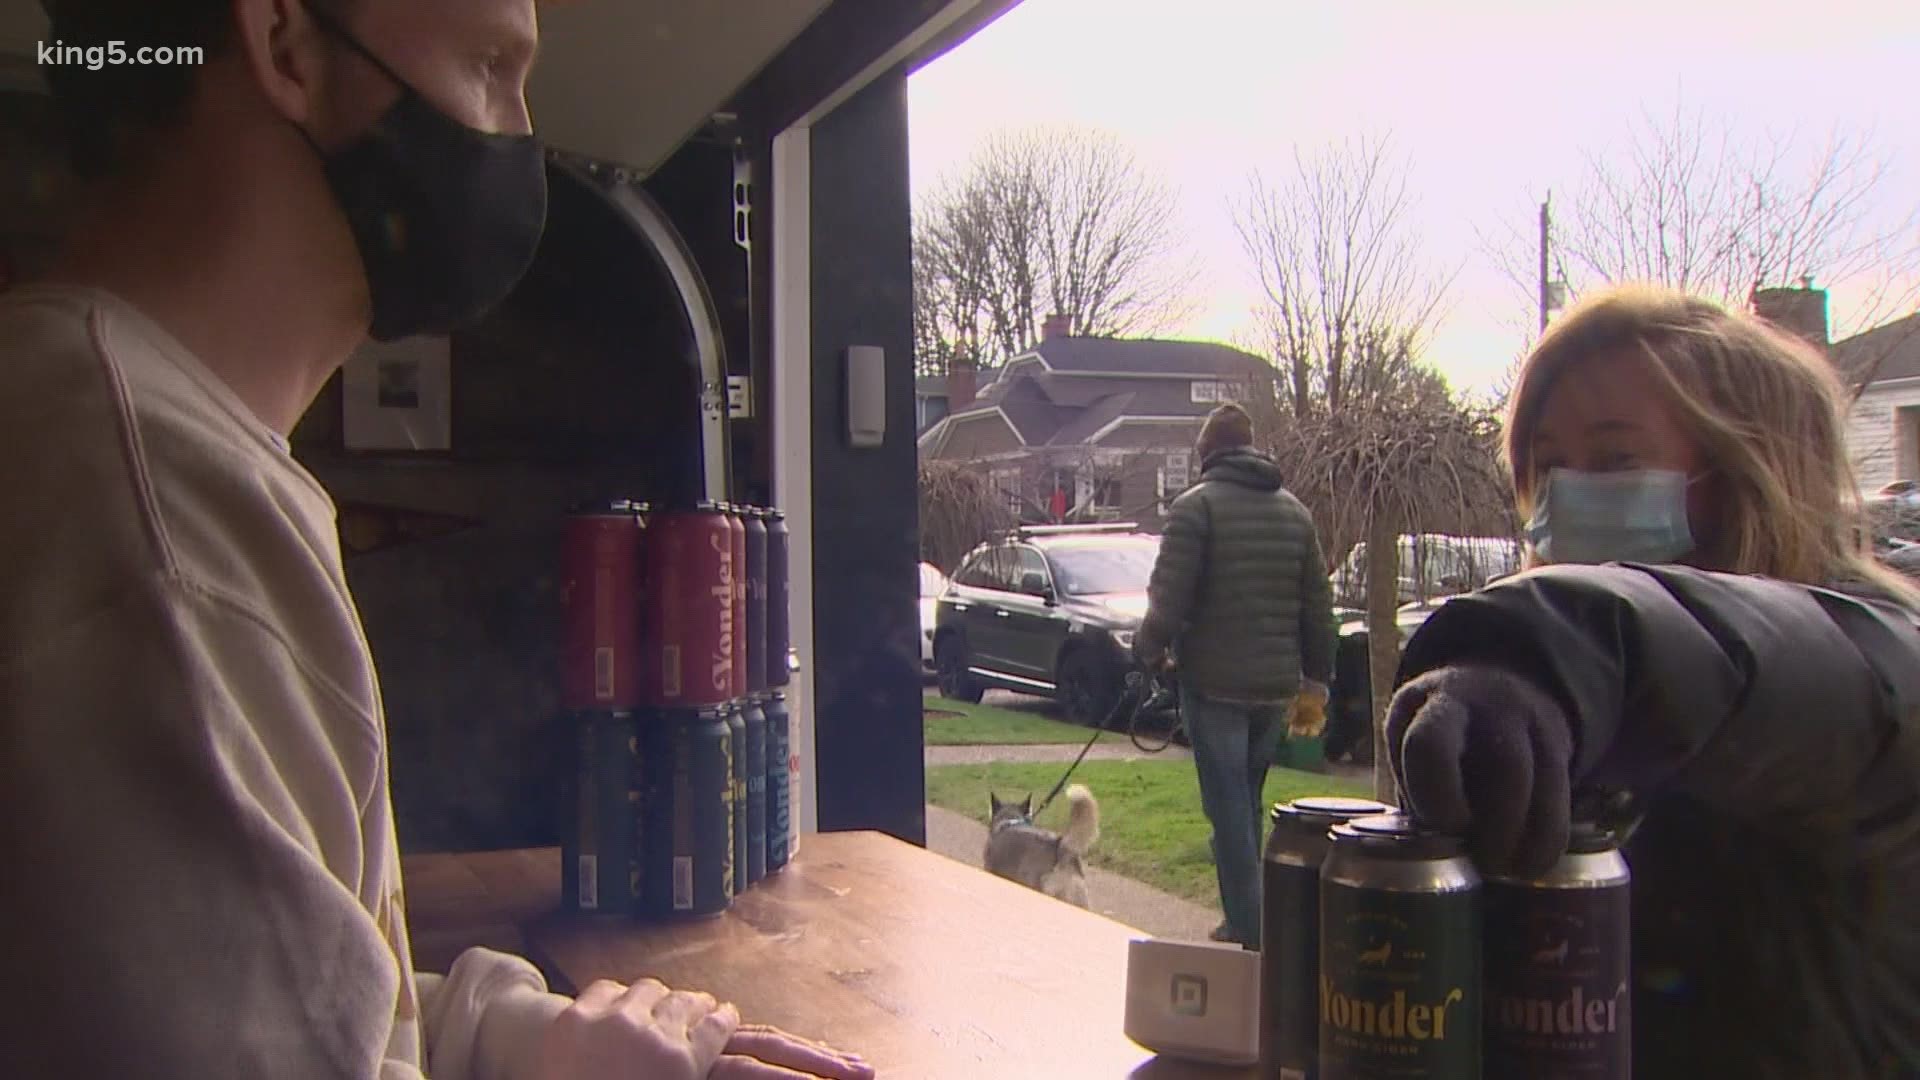 Yonder Cider Company adapted to the pandemic by opening a walk-up counter in a garage in Seattle's Phinney Ridge neighborhood. But a neighbor was not happy.